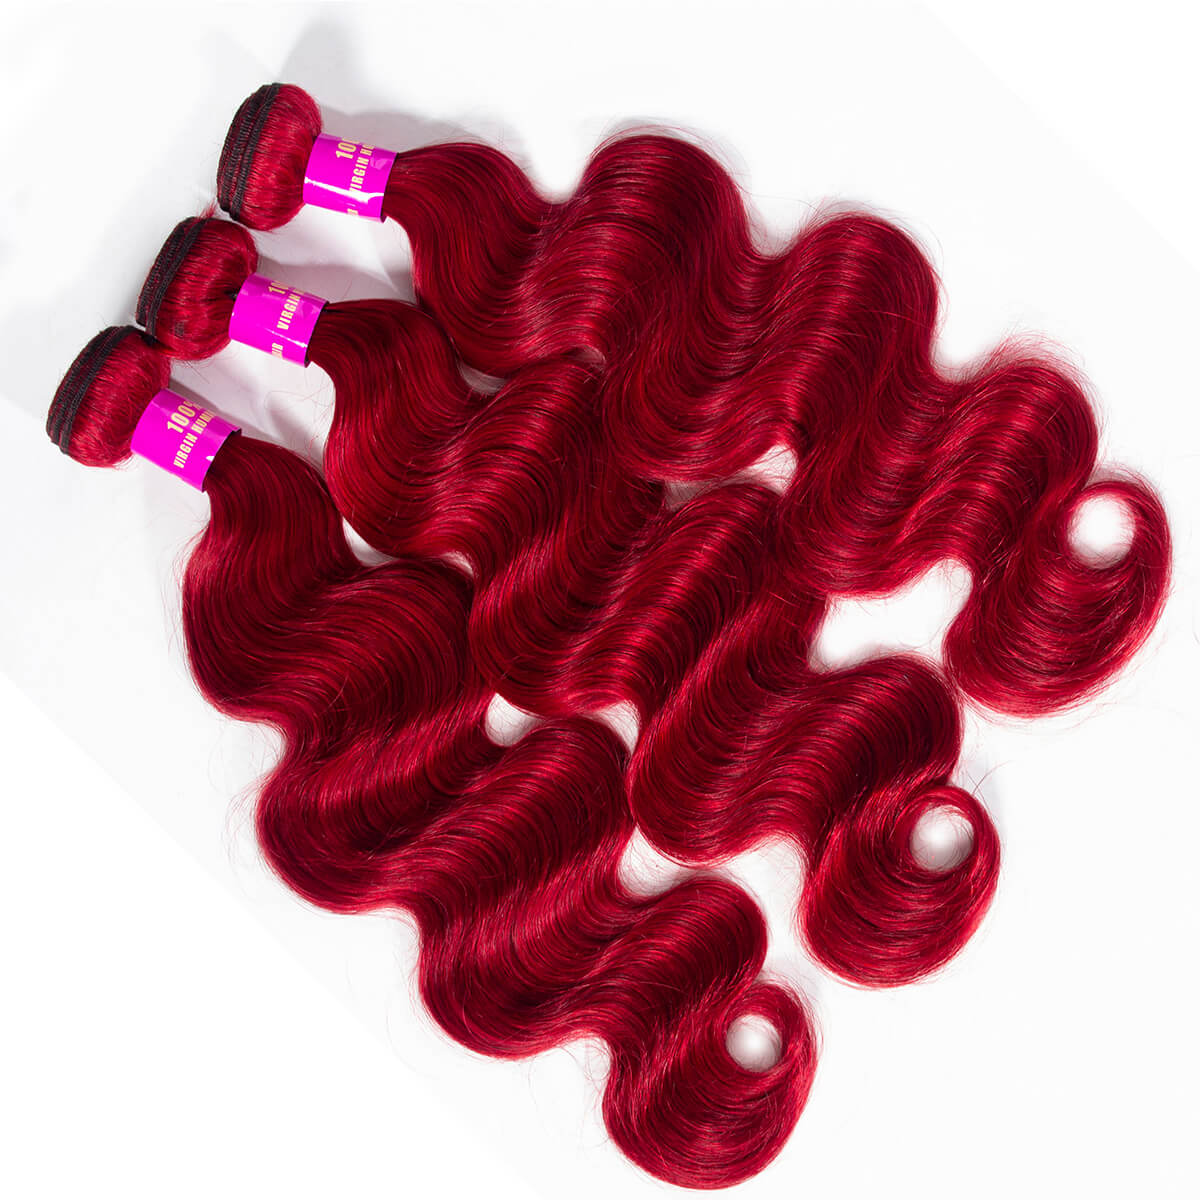 ombre body wave hair,red body wave bundles,red body wave hair,red color hair,red hair,red color body wave,body hair red color,brazilian body hair red color